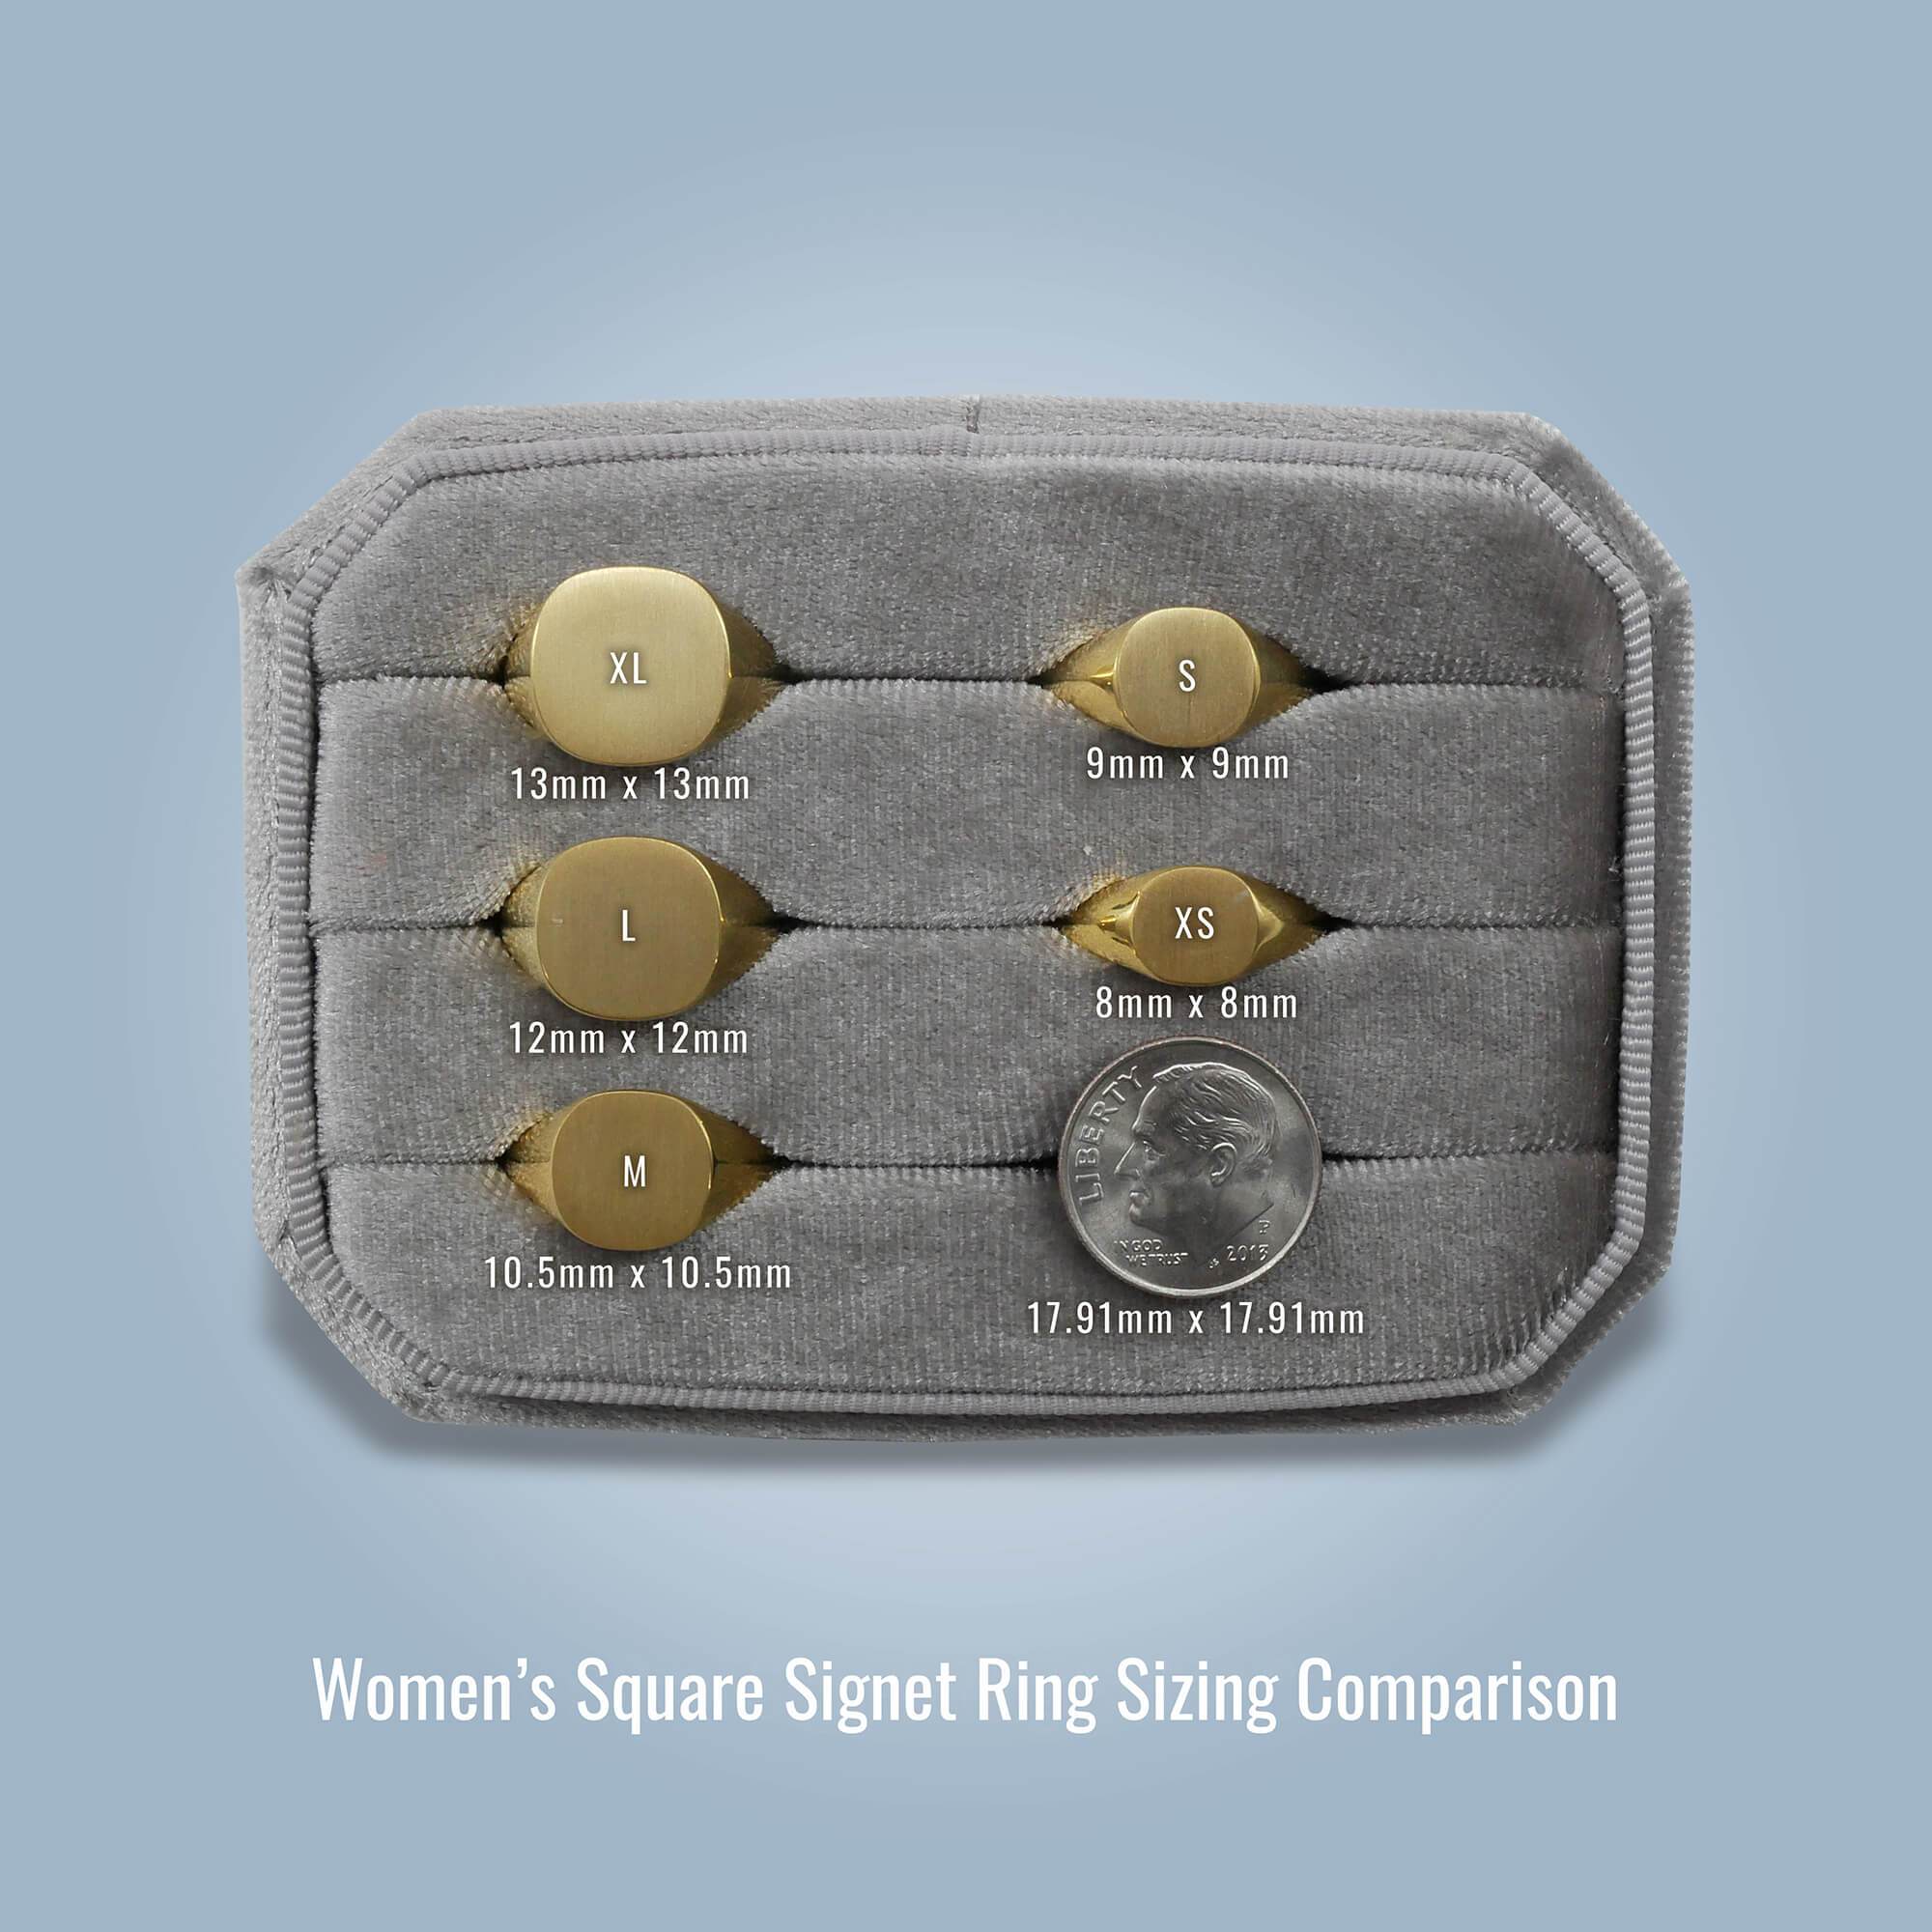 Women's Square Signet Ring - Extra Small Signet Rings deBebians 